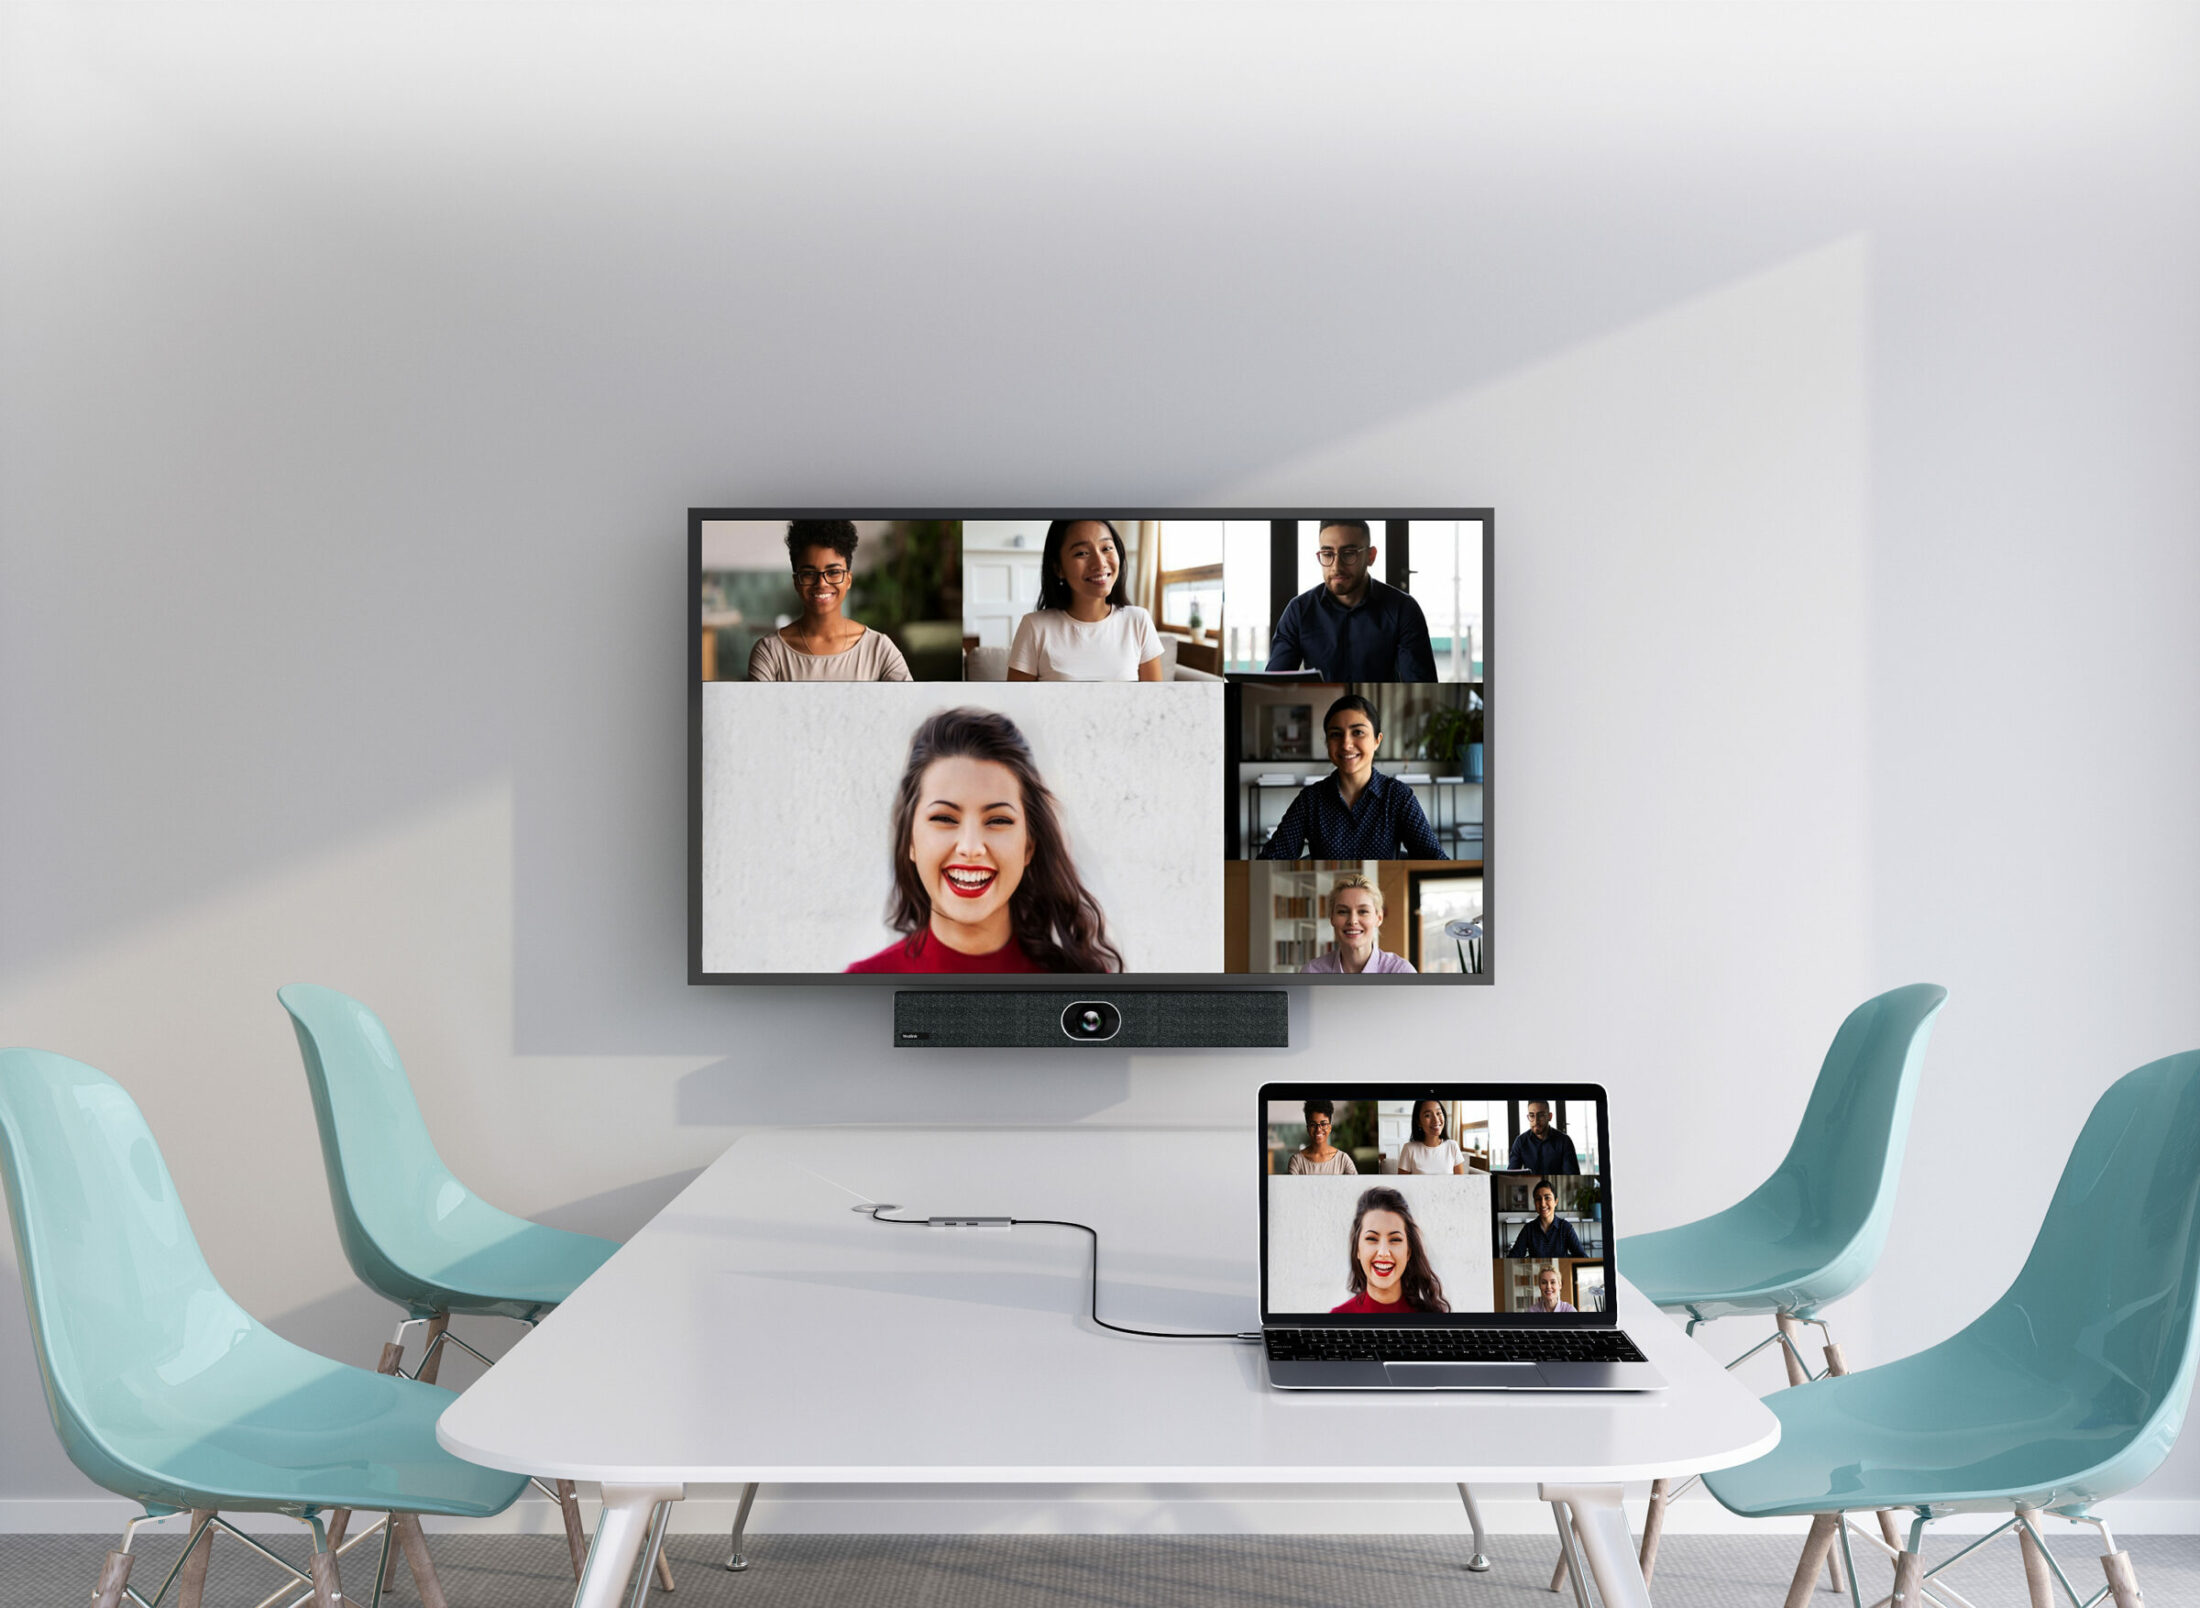 Video conferencing - BYOD-UVC40-2400x1754